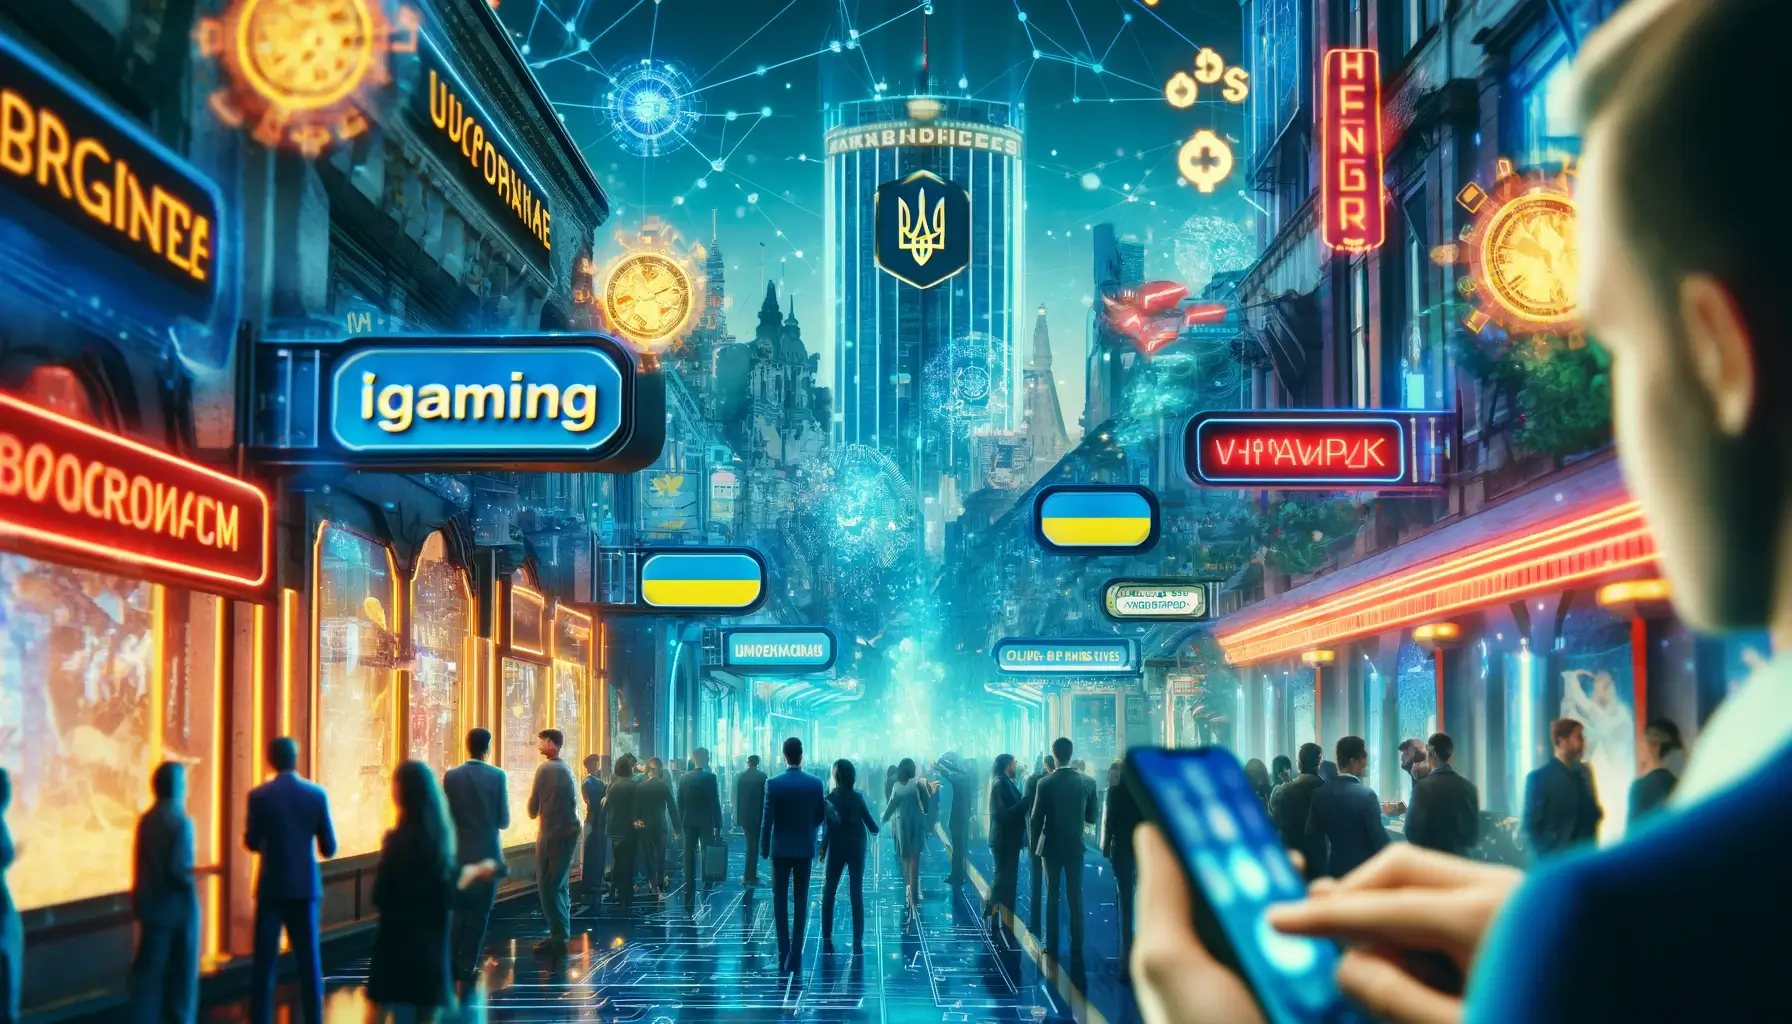 This image depicts a diverse group of people in Kyiv, engaged in various digital games, highlighting the growth and innovation in the iGaming sector.